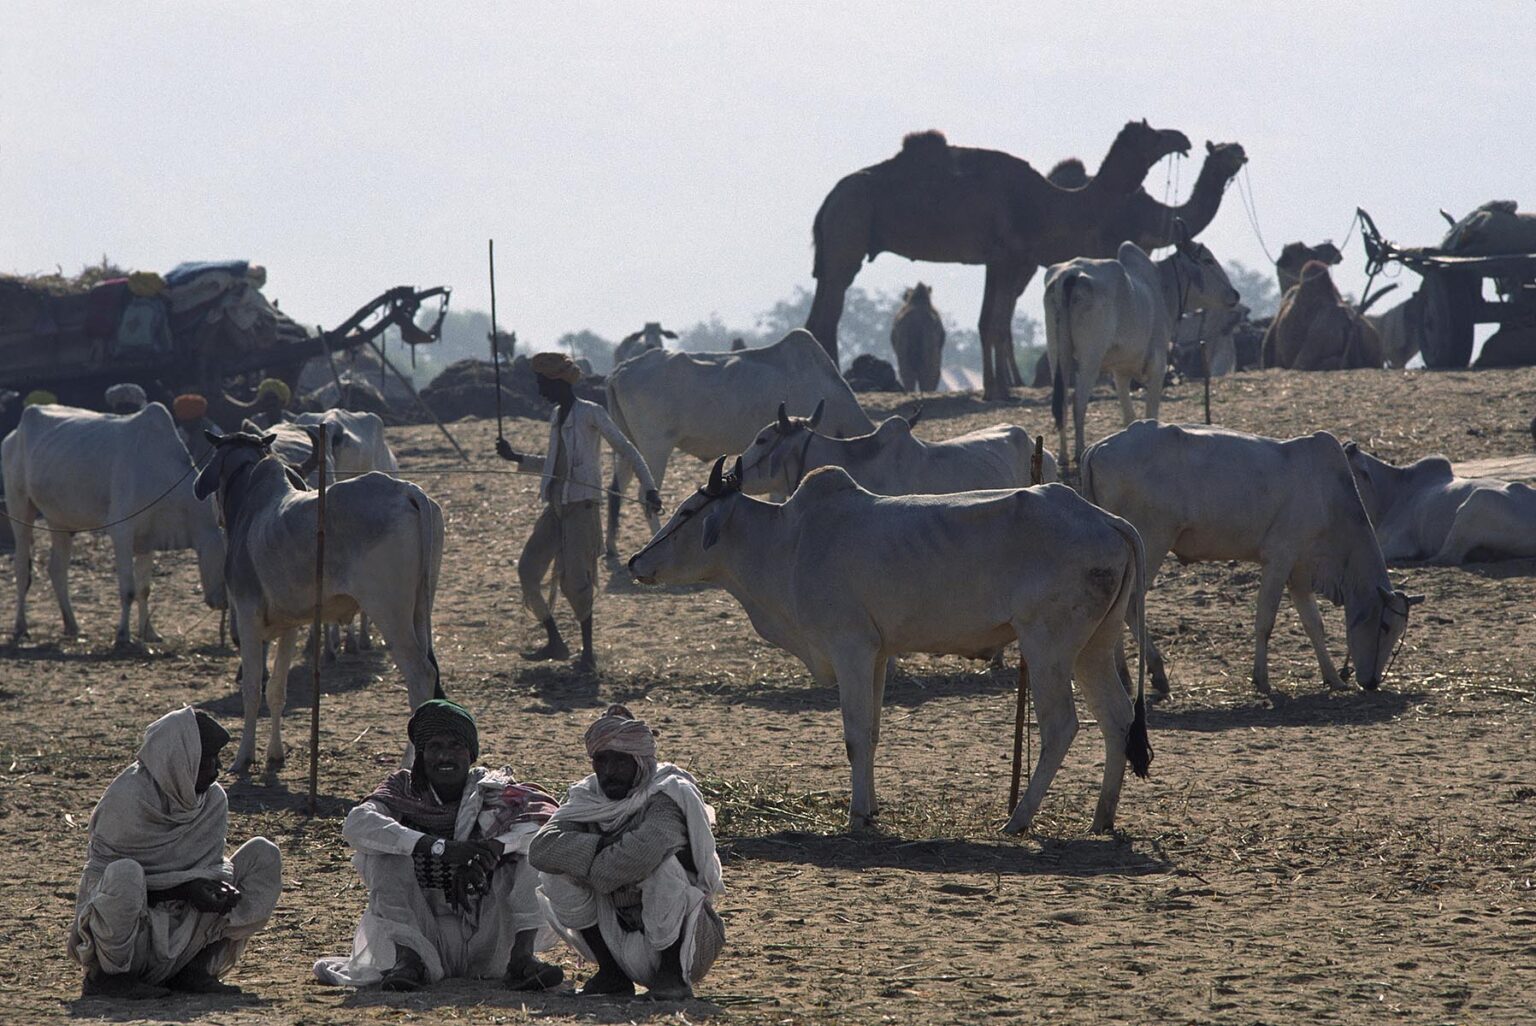 RAJASTHANI MEN among CATTLE and CAMELS at the PUSHKAR CAMEL FAIR, a 5 day religious festival - RAJASTHAN, INDIA